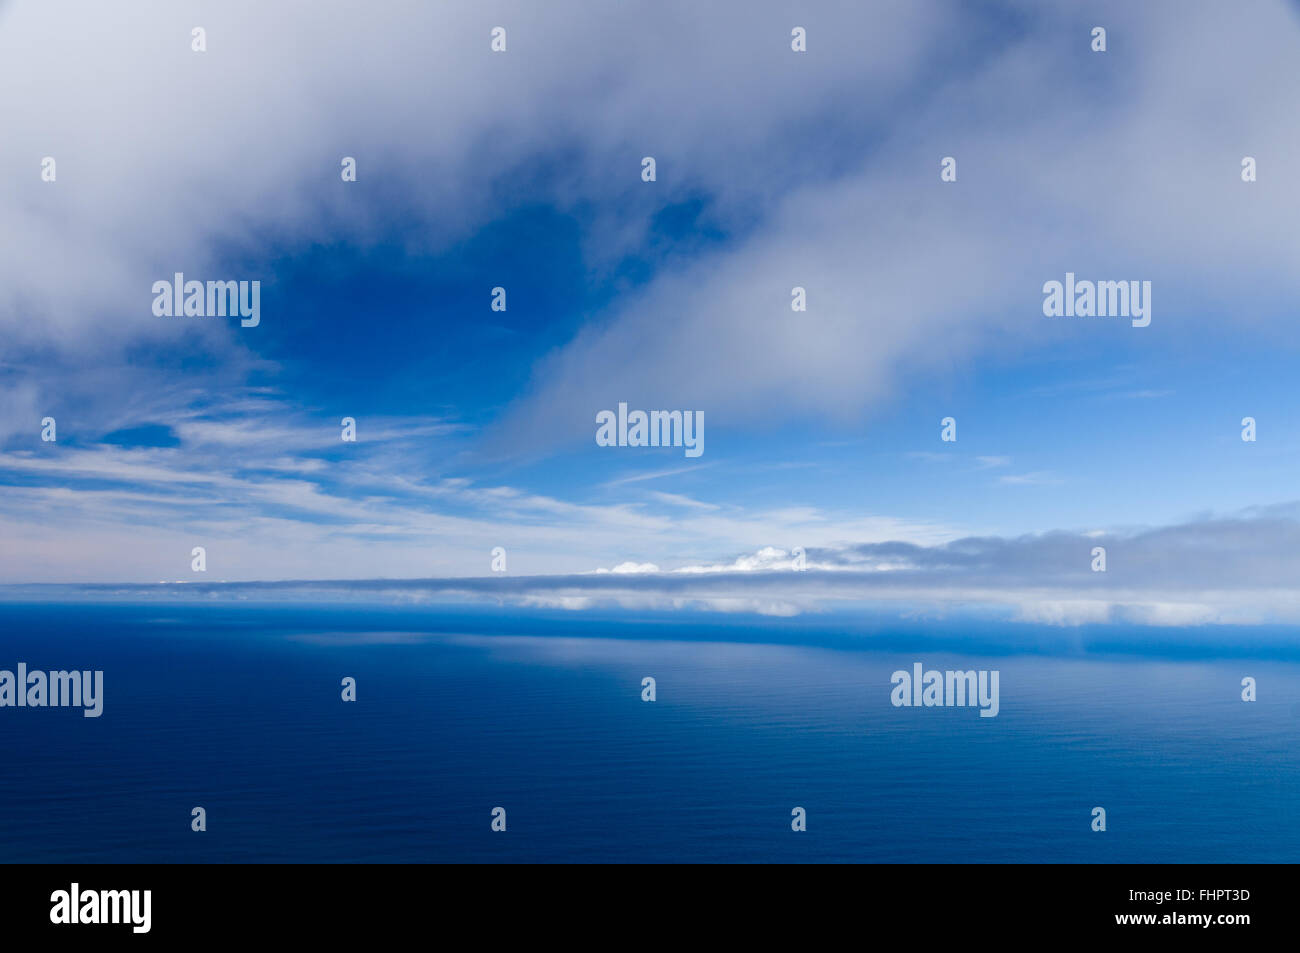 Cloudy sky and calm ocean background, high angle view Stock Photo